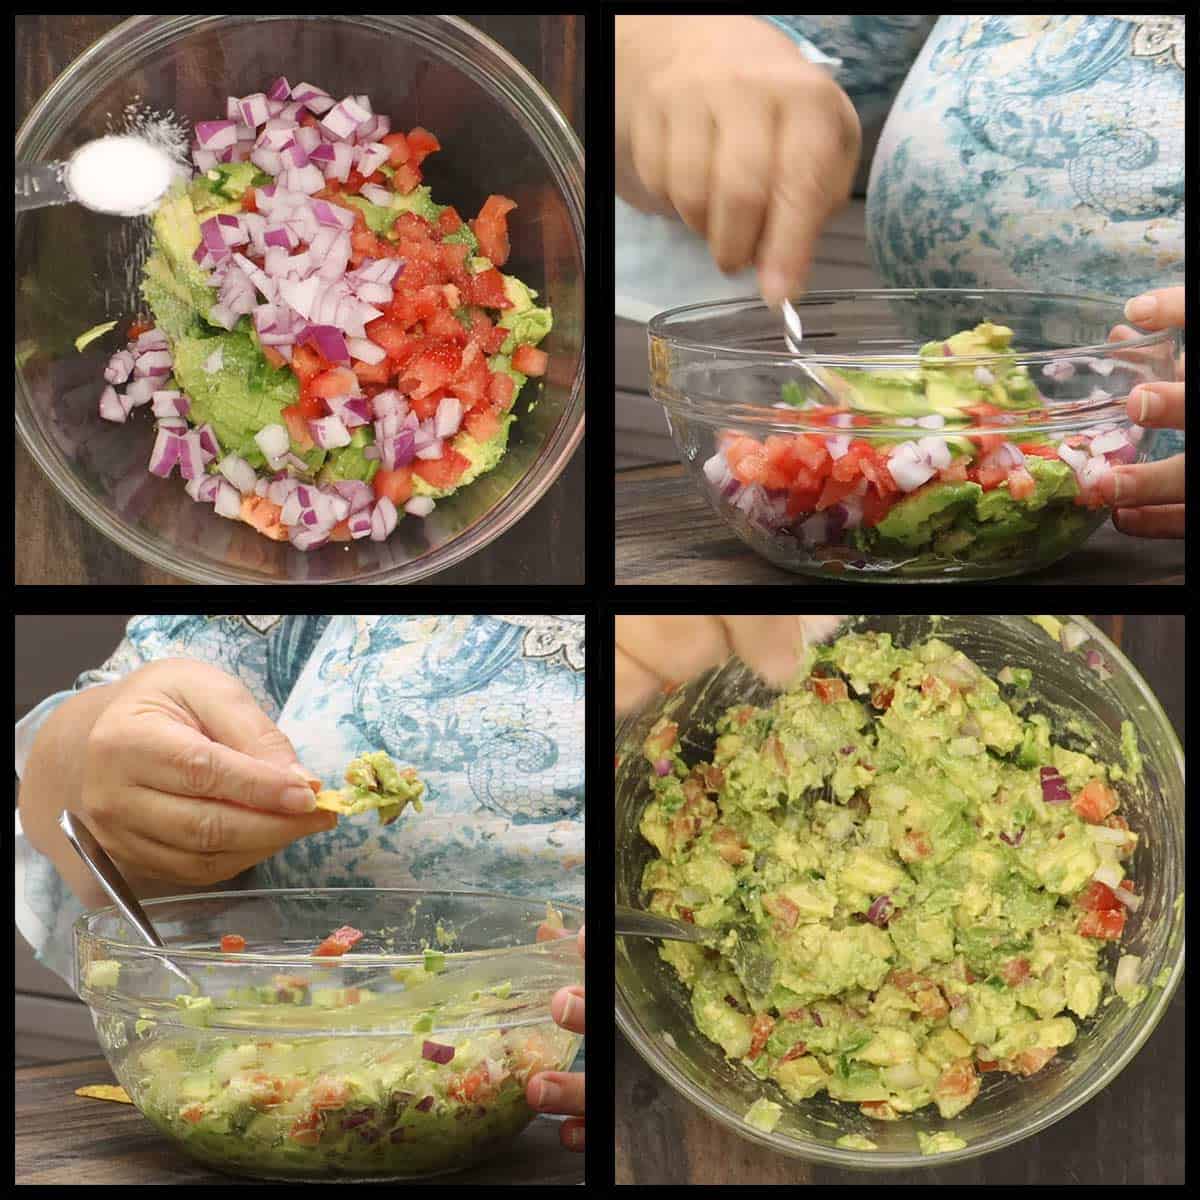 Mixing and tasting the guacamole.